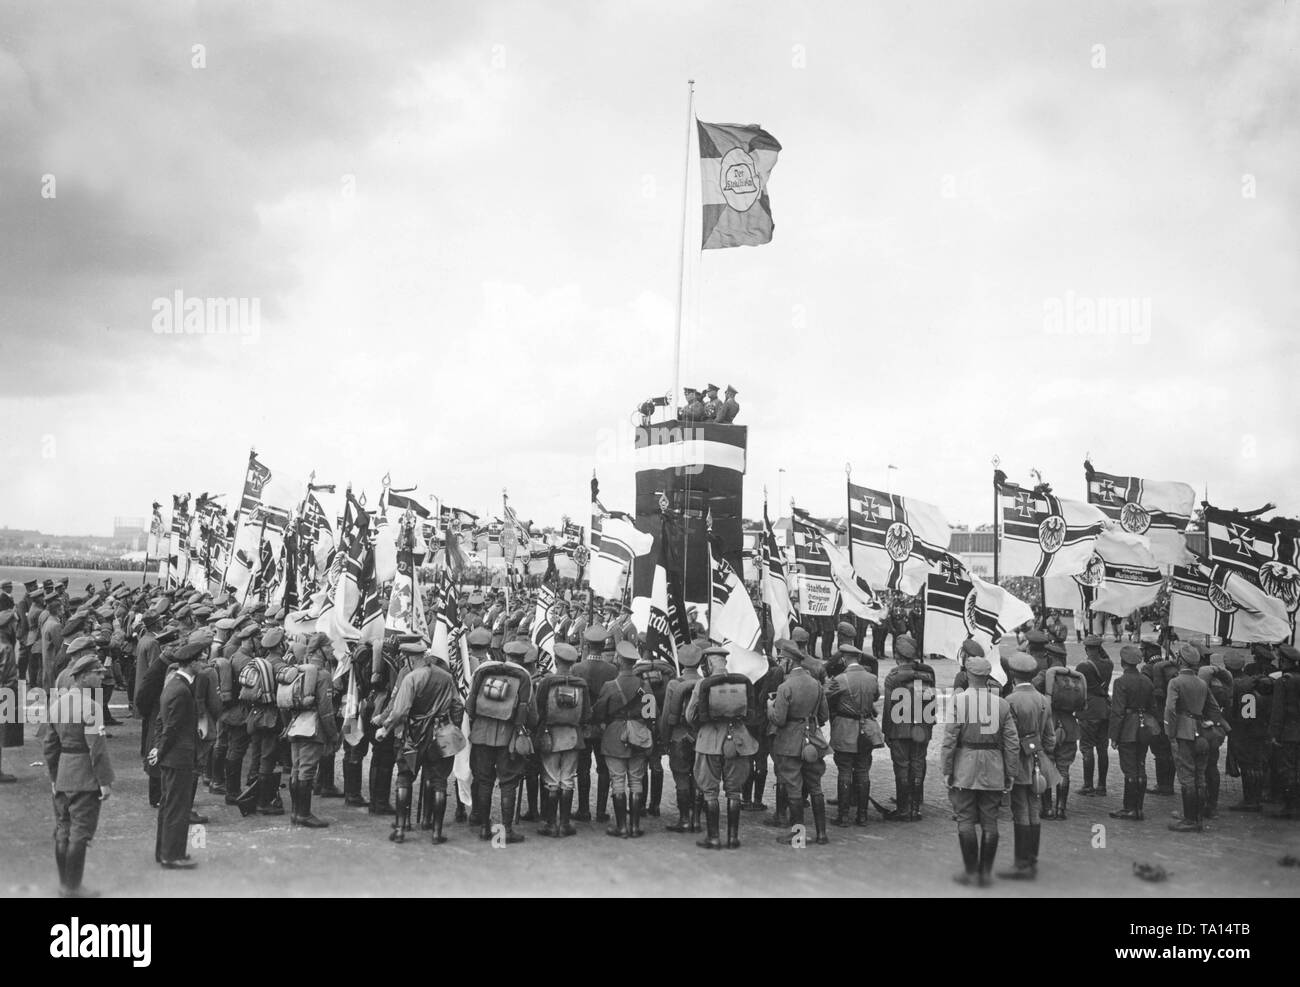 As part of the 13th Reichsfrontsoldatstag (Frontline Soldiers' Day), the 2nd leader of the Stahlhlem, Theodor Duesterberg, dedicates the Reichskriegsflaggen (imperial war flags) of 40 newly founded local groups. On a flagpole is a flag with the logo of the Stahlhelm. Stock Photo